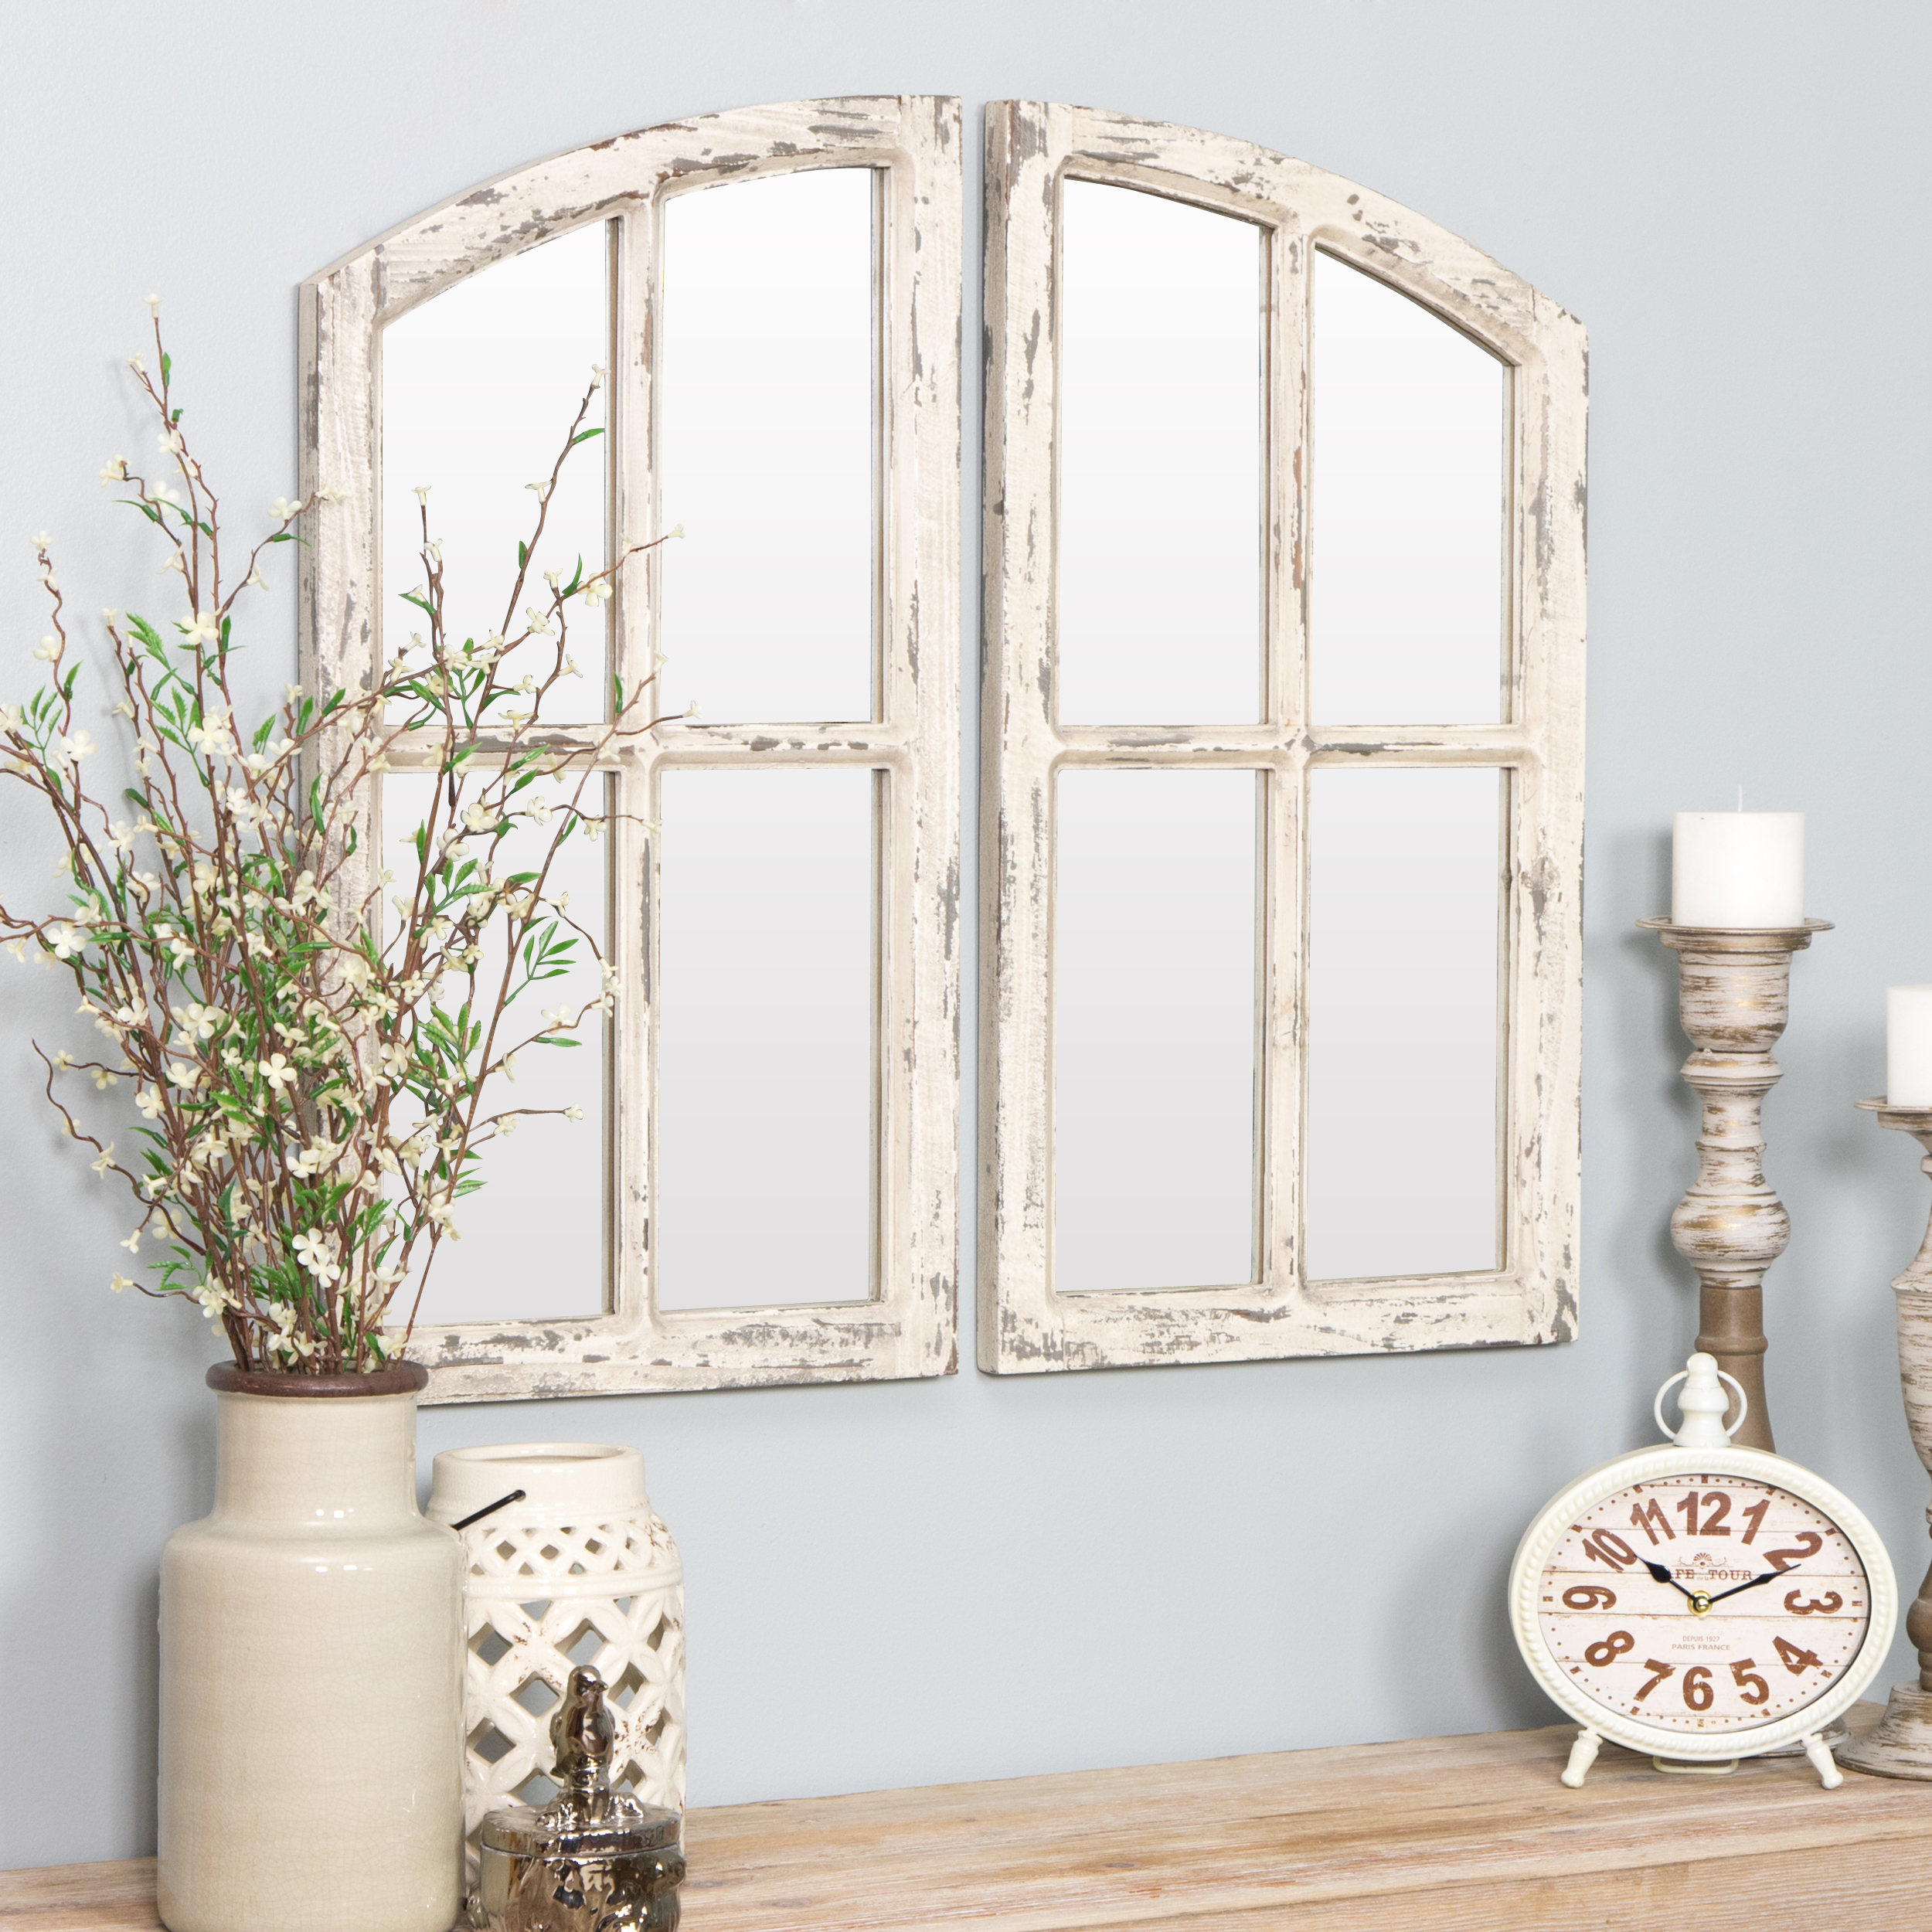 Jolene Arch Window Pane Mirrors Off-White 27" x 15" (Set of 2) by Aspire - image 1 of 6